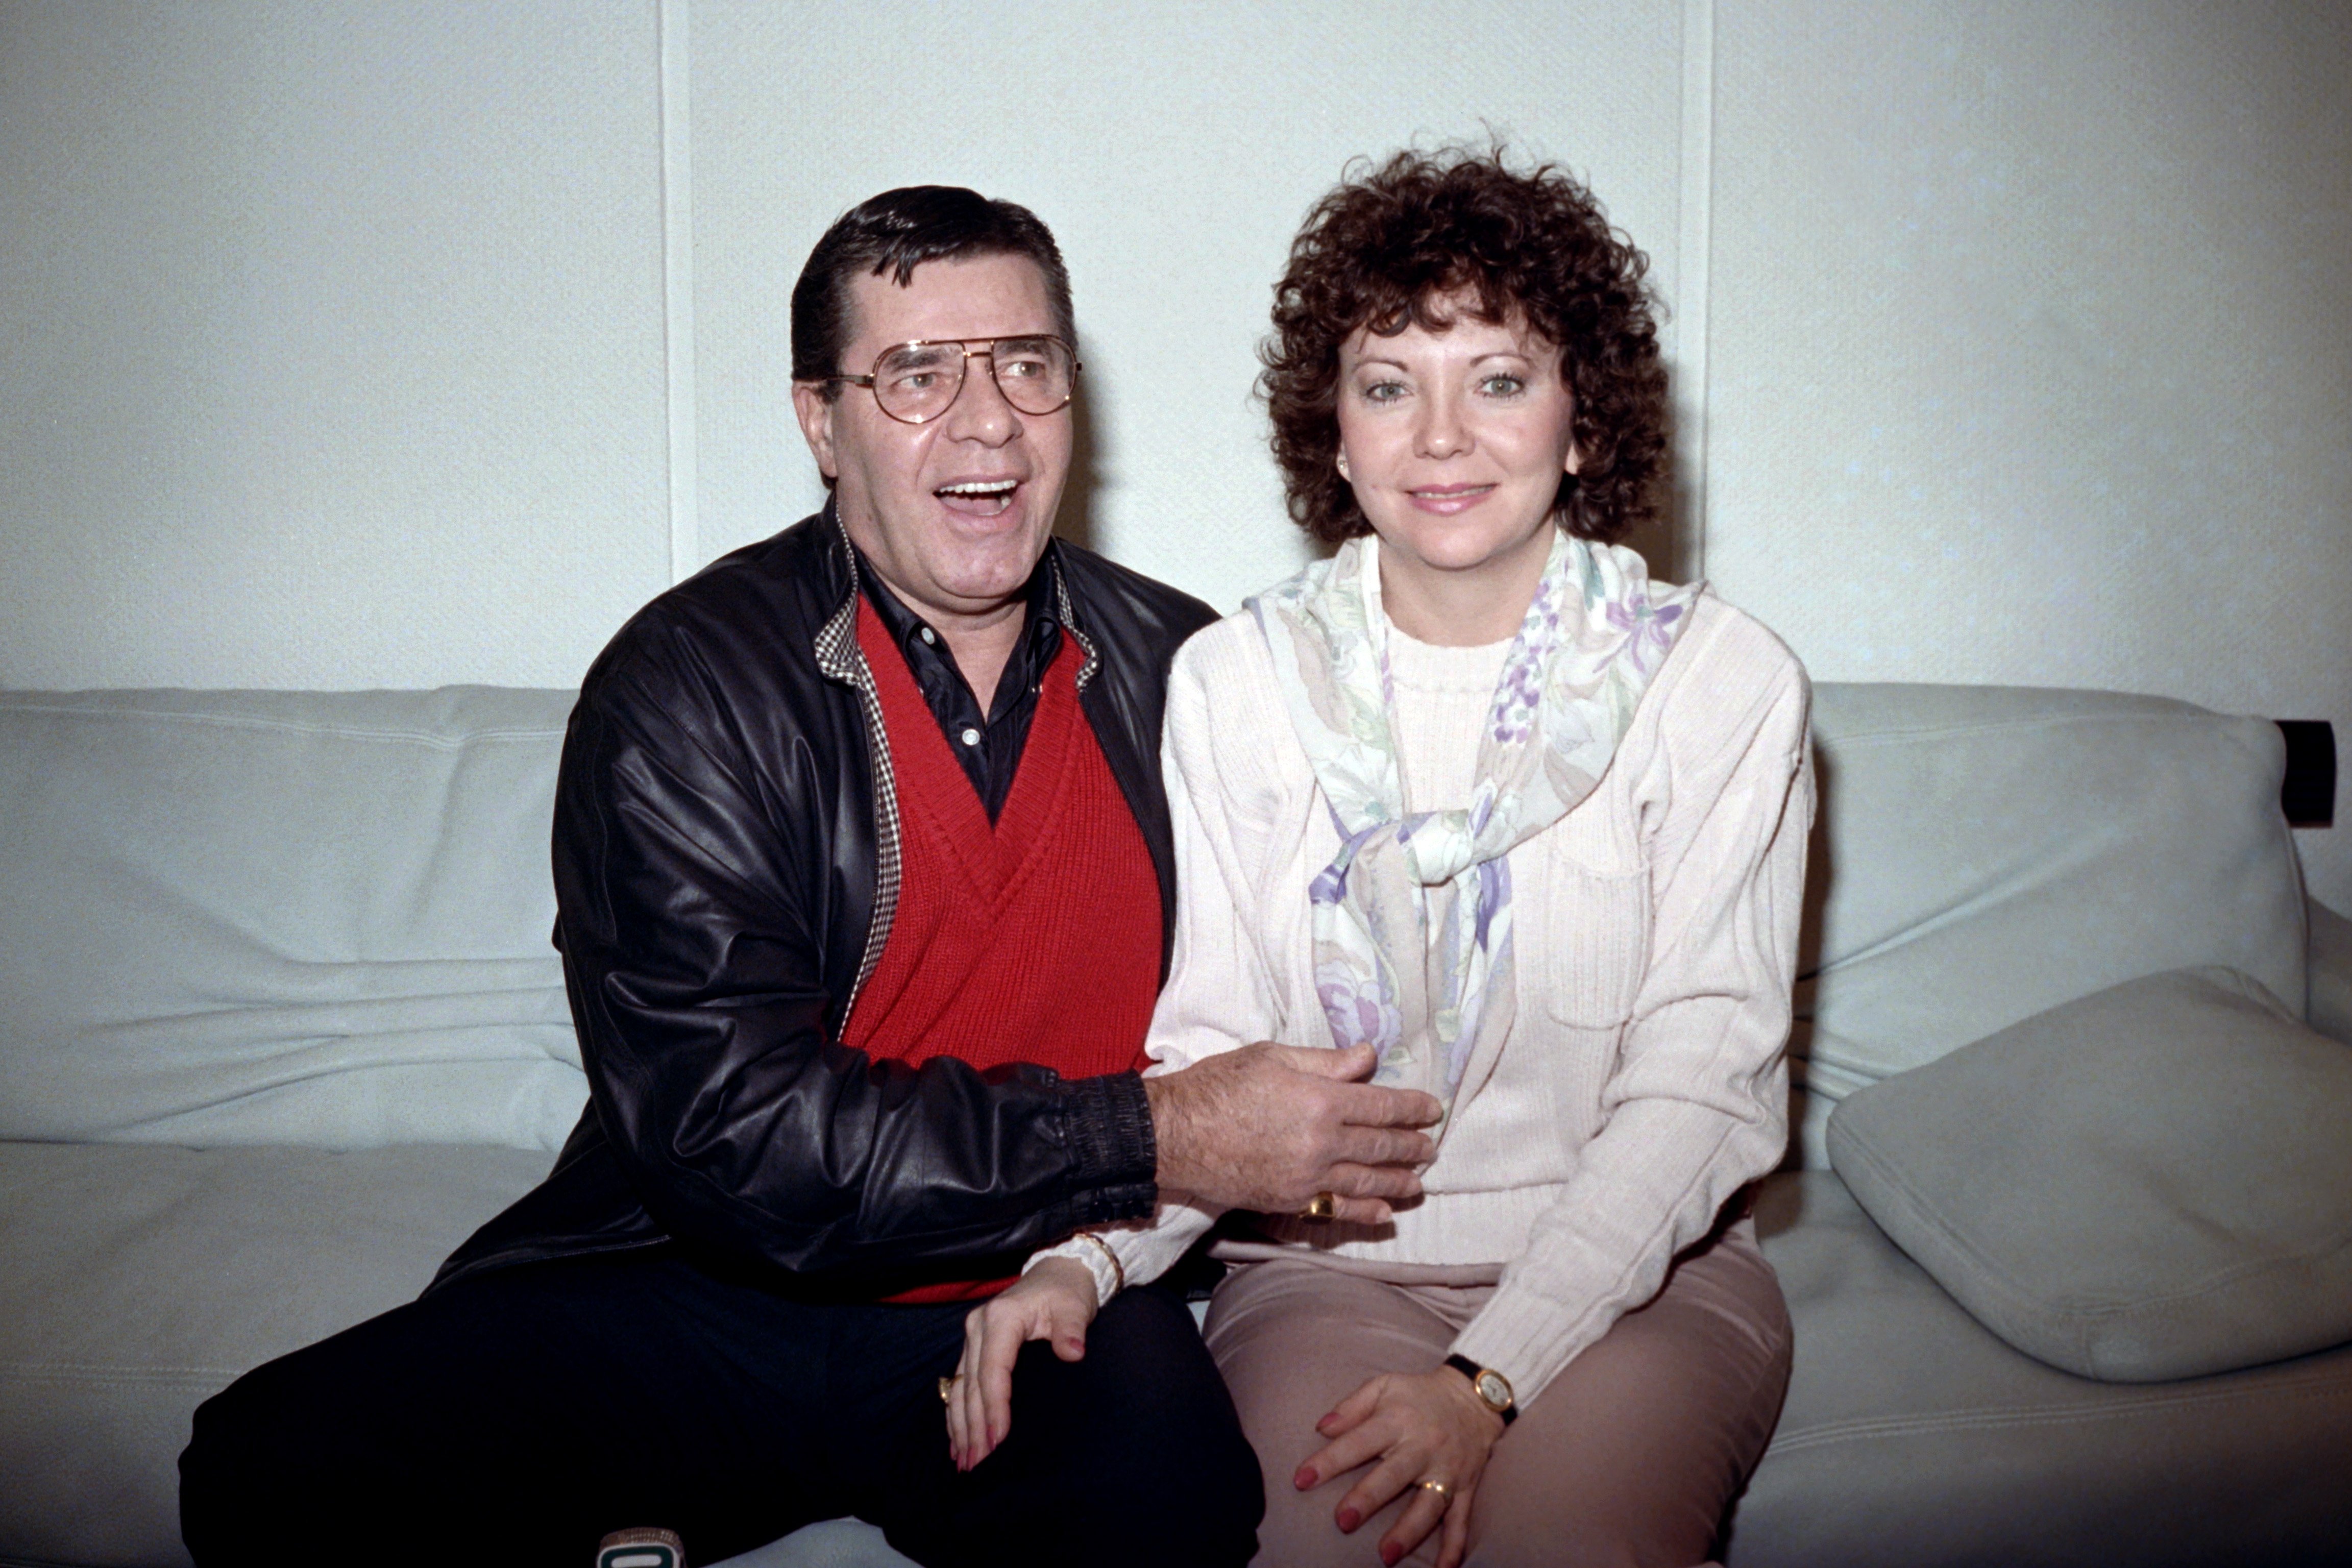 Screenwriter Jerry Lewis posing with his wife SanDee Pitnick during a press conference on April 10, 1989 in Paris. / Source: Getty Images